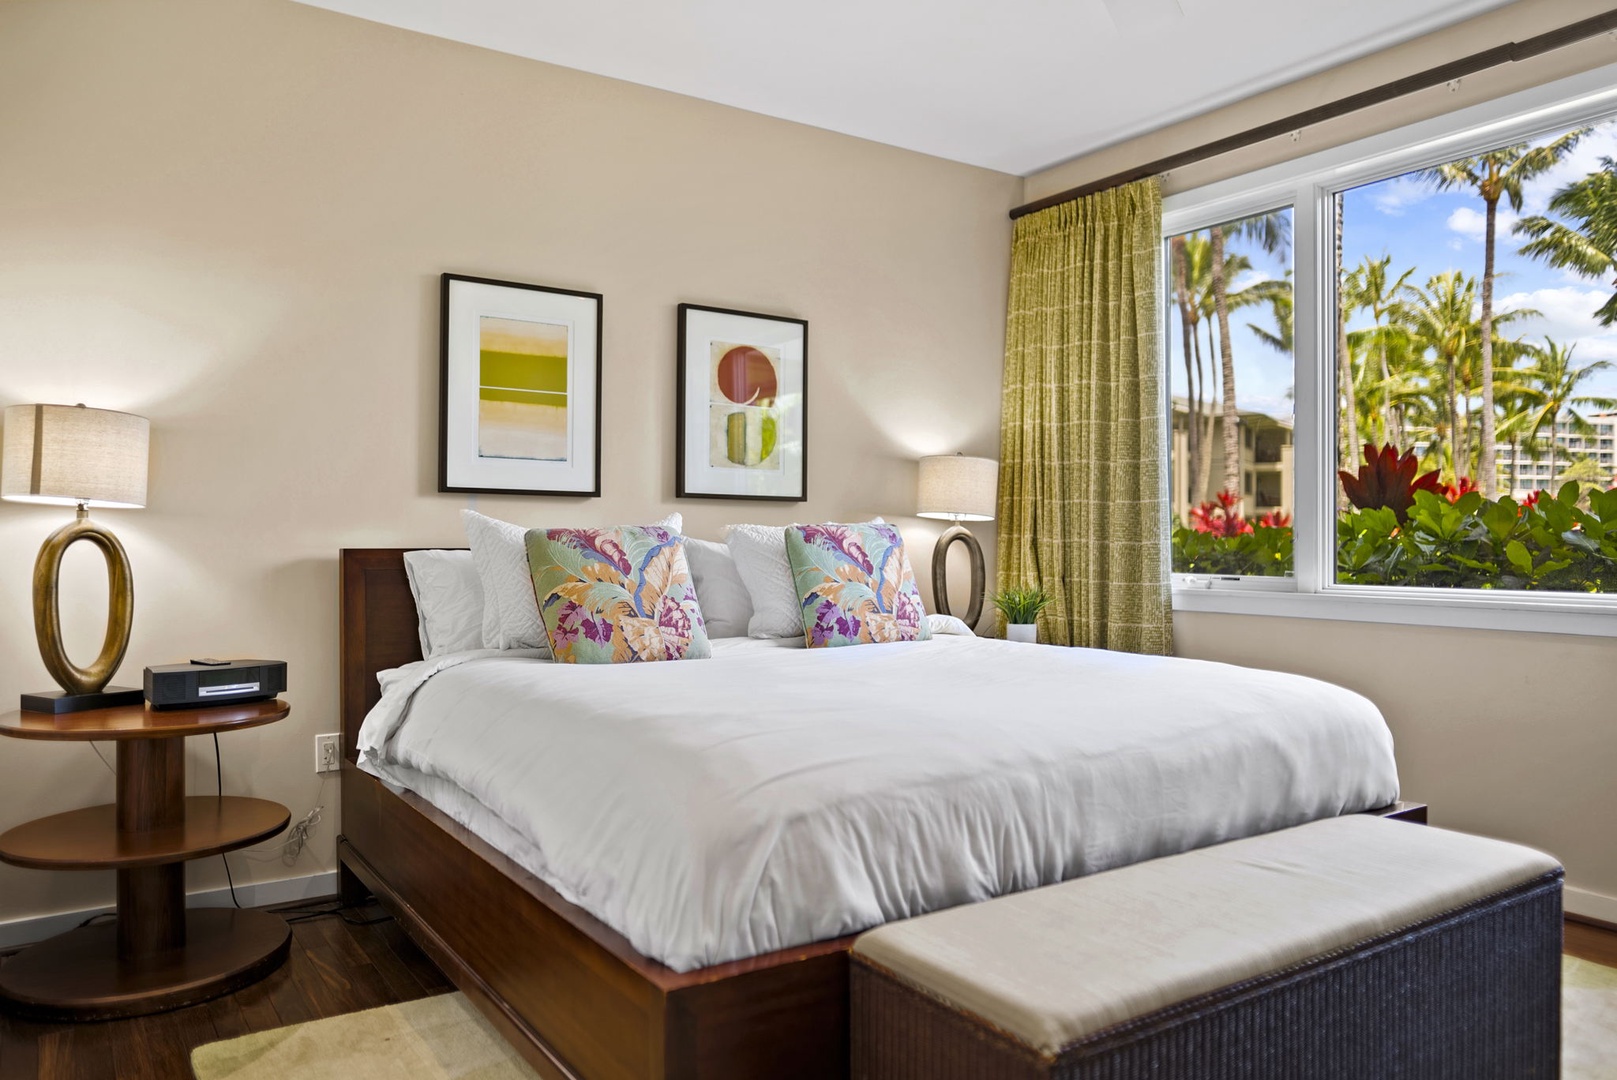 Kahuku Vacation Rentals, Turtle Bay Villas 112 - Main bedroom with King sized bed